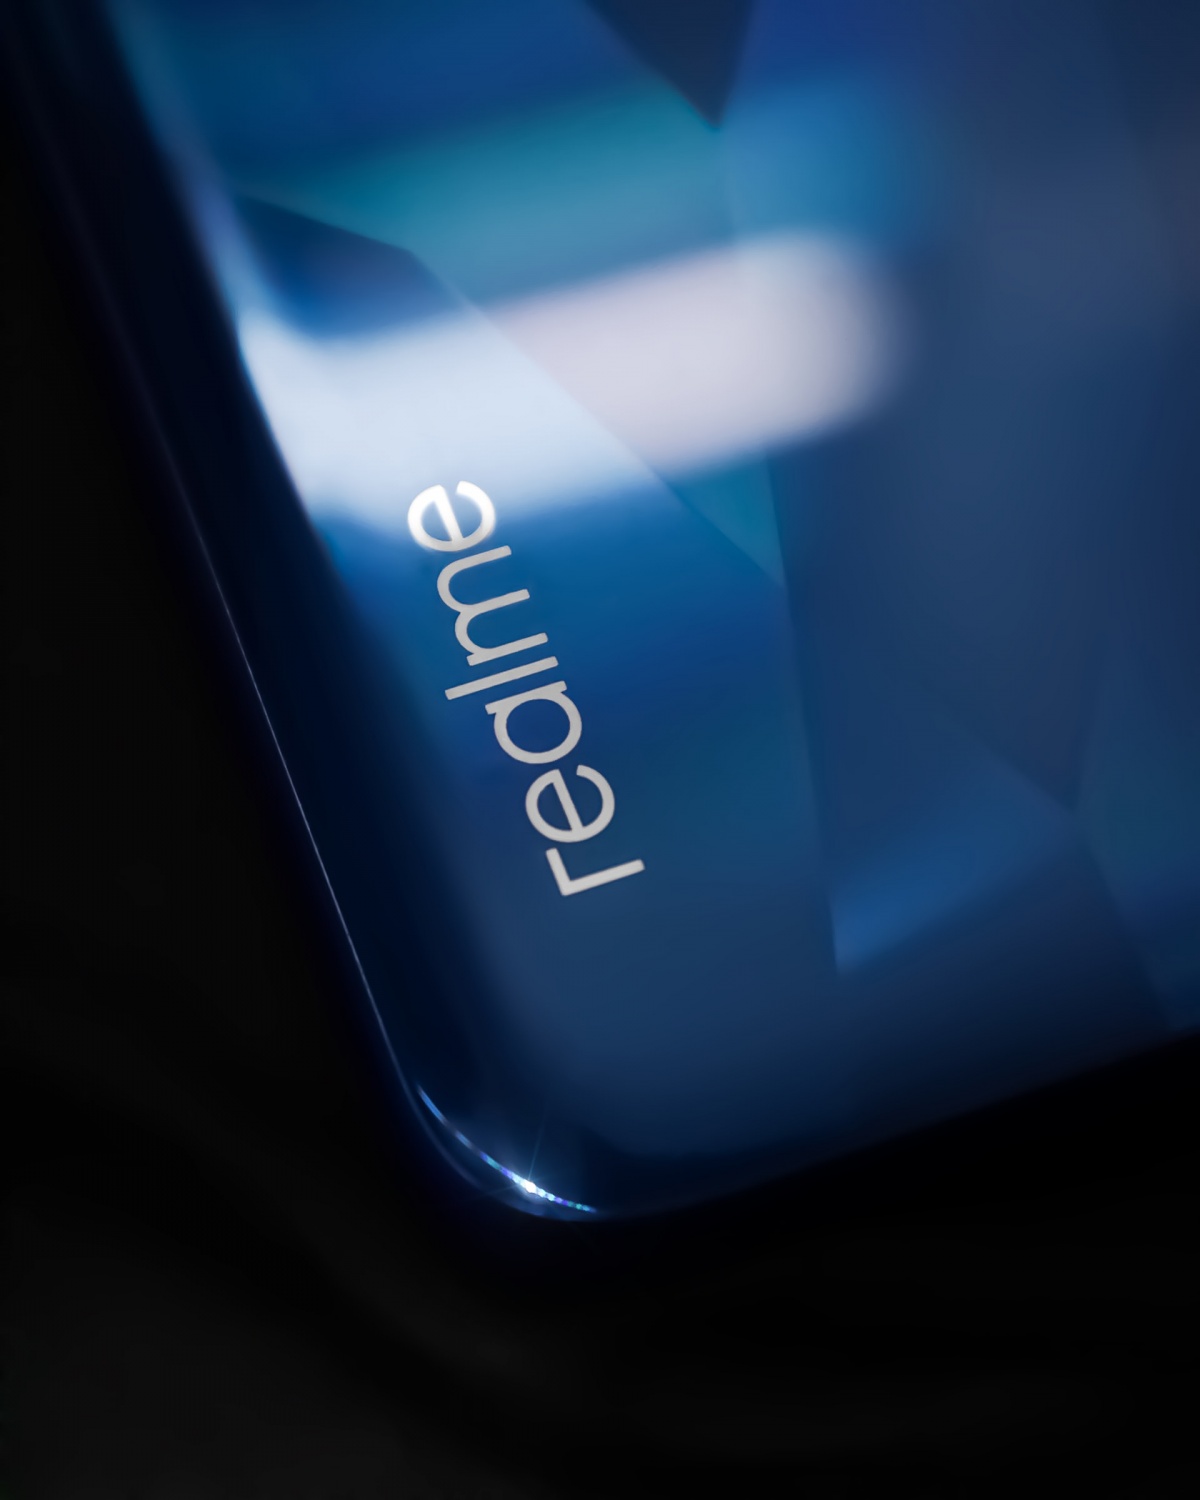 New Leak Suggests Realme GT Neo2 Will Have Dimensity 1200-AI Chip, Snapdragon 870, and MORE